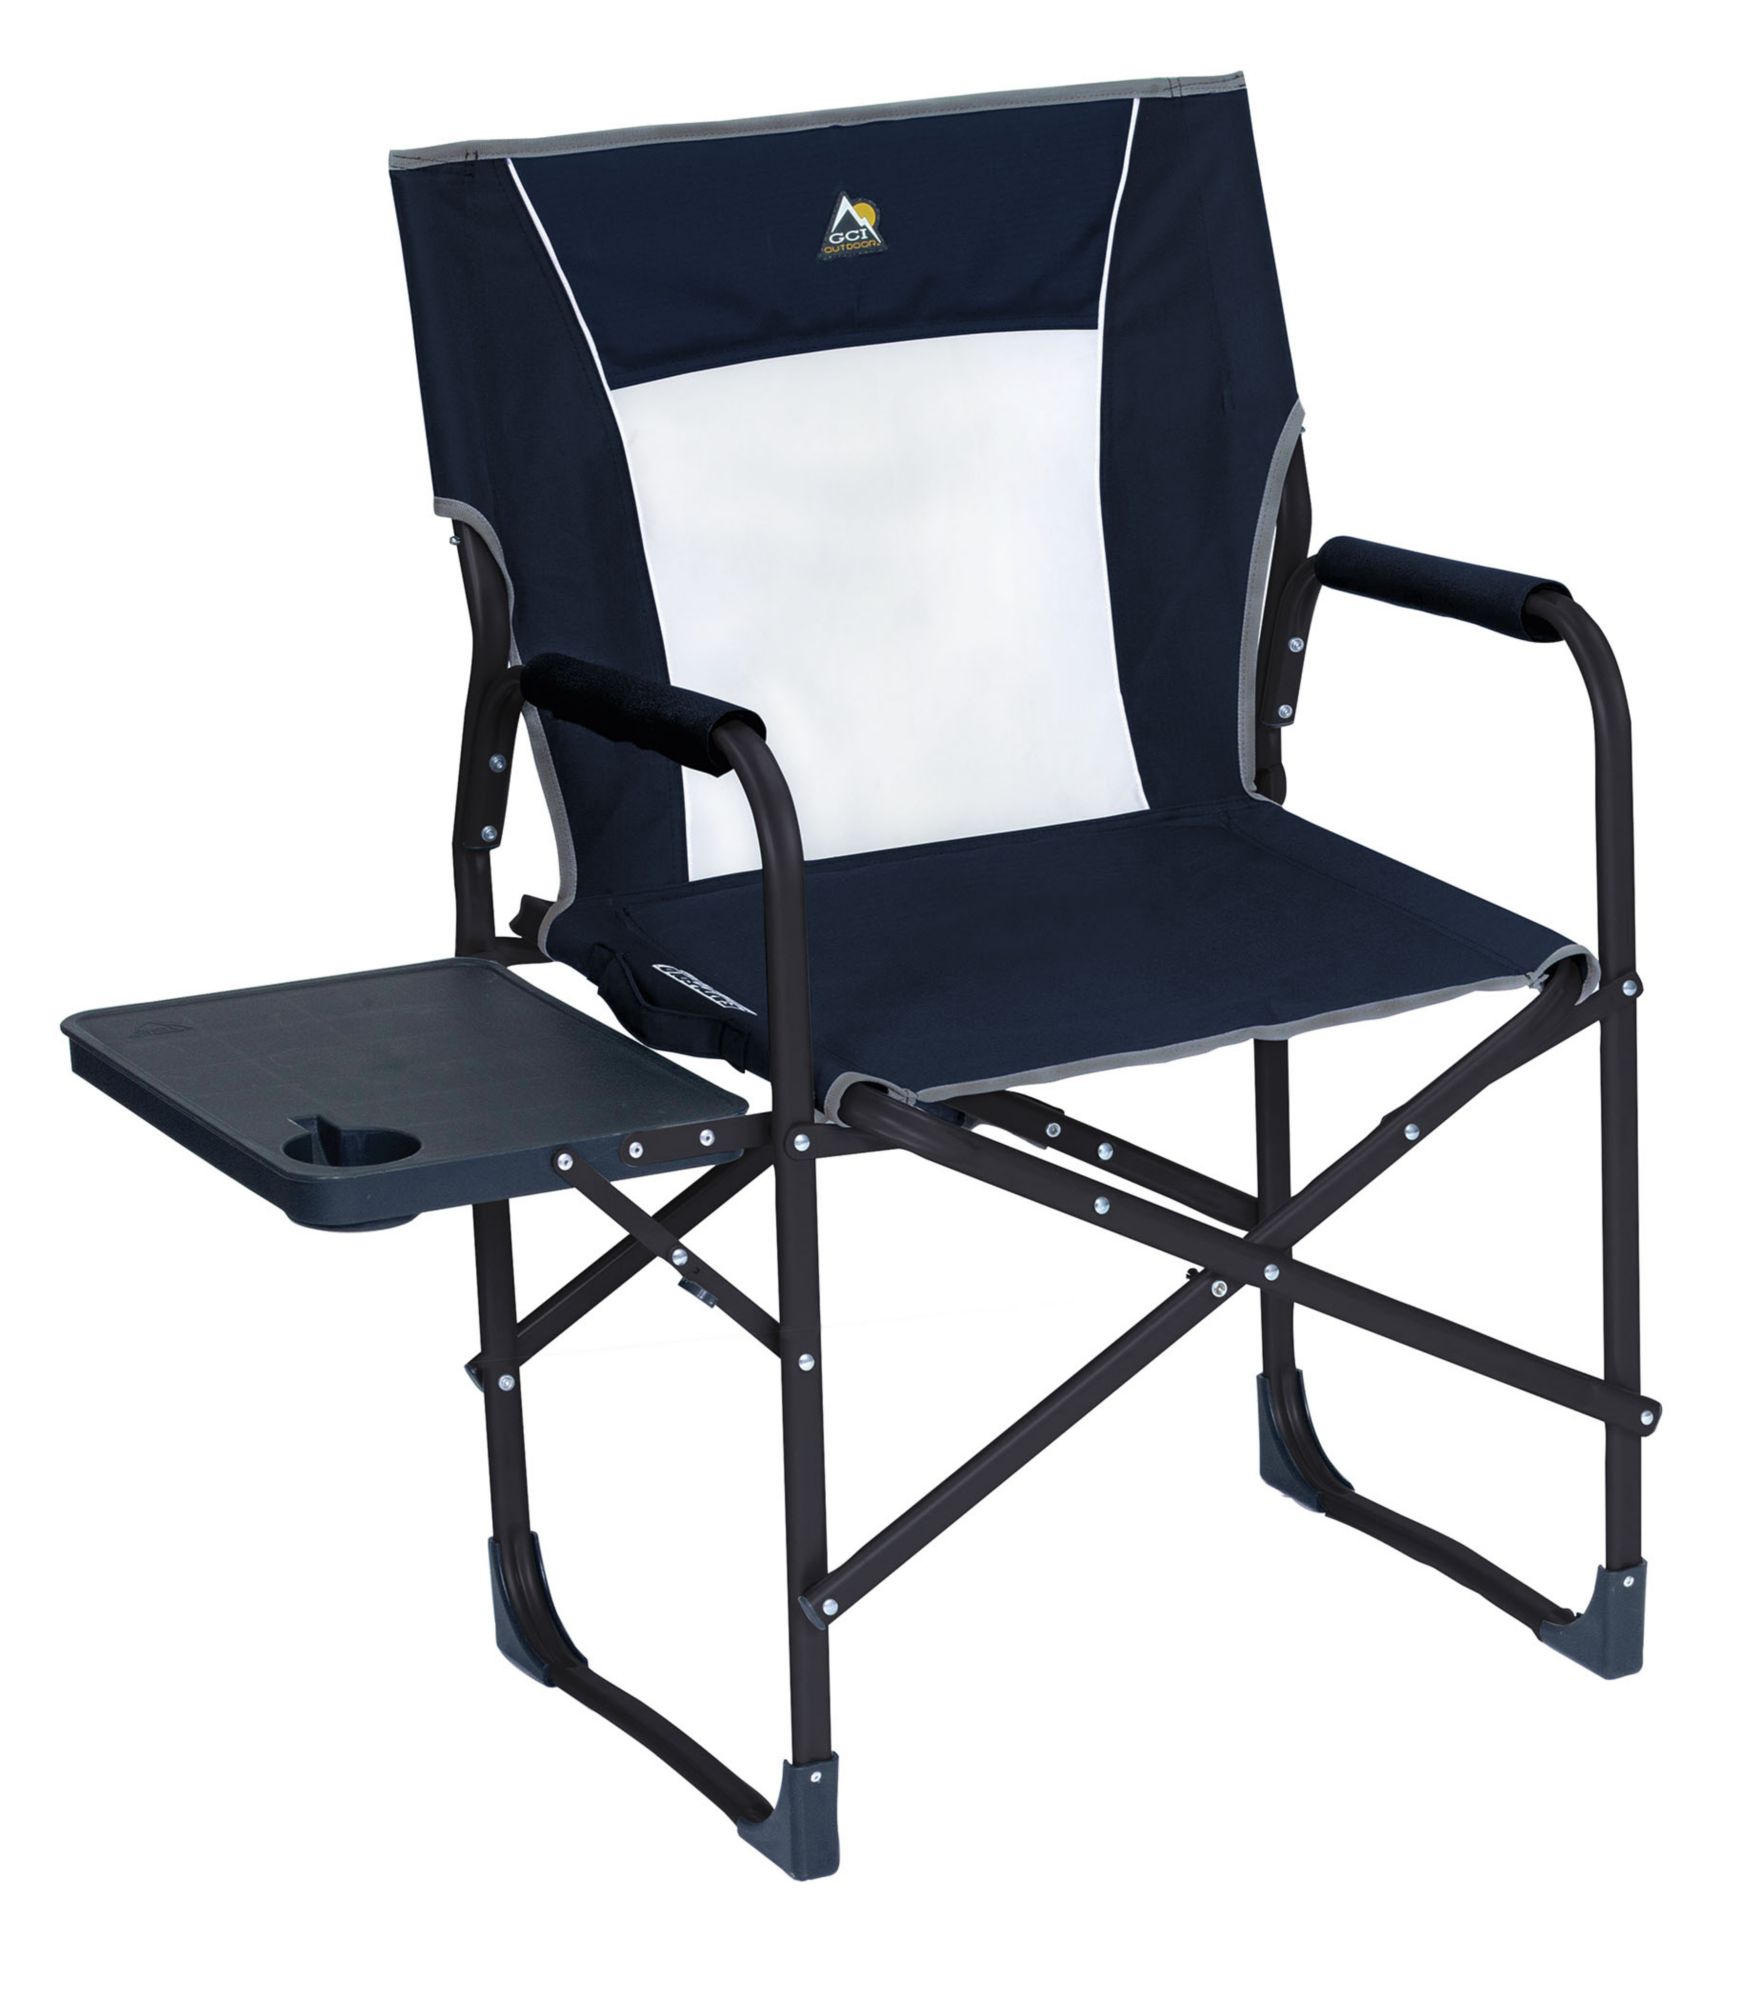 Oversized Folding Lawn Chairs Best Price Guarantee At Dick S